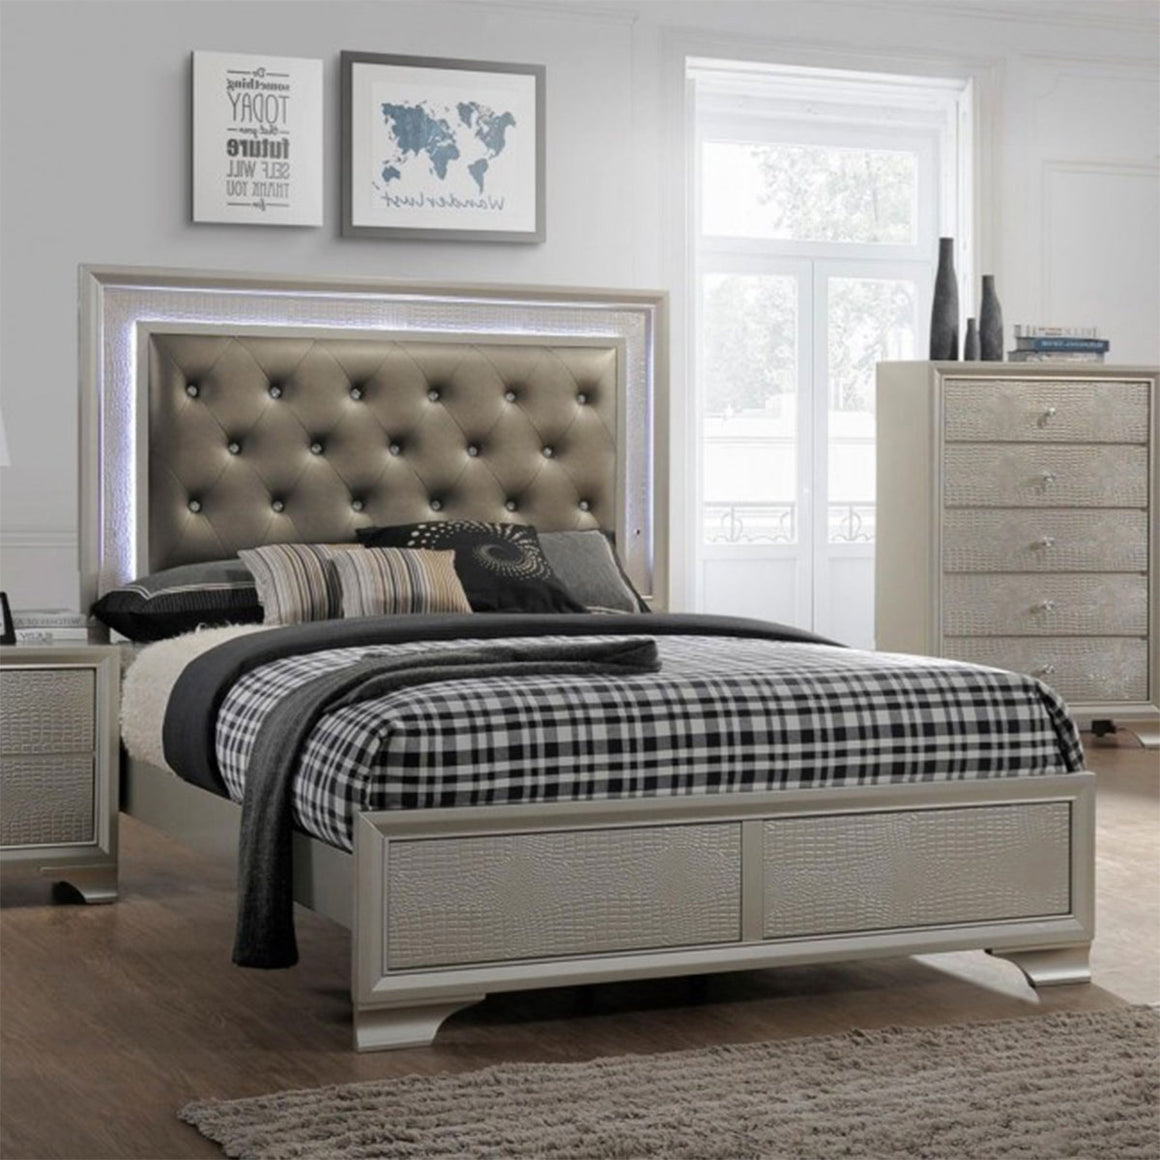 Lyssa Upholstered Panel Bed